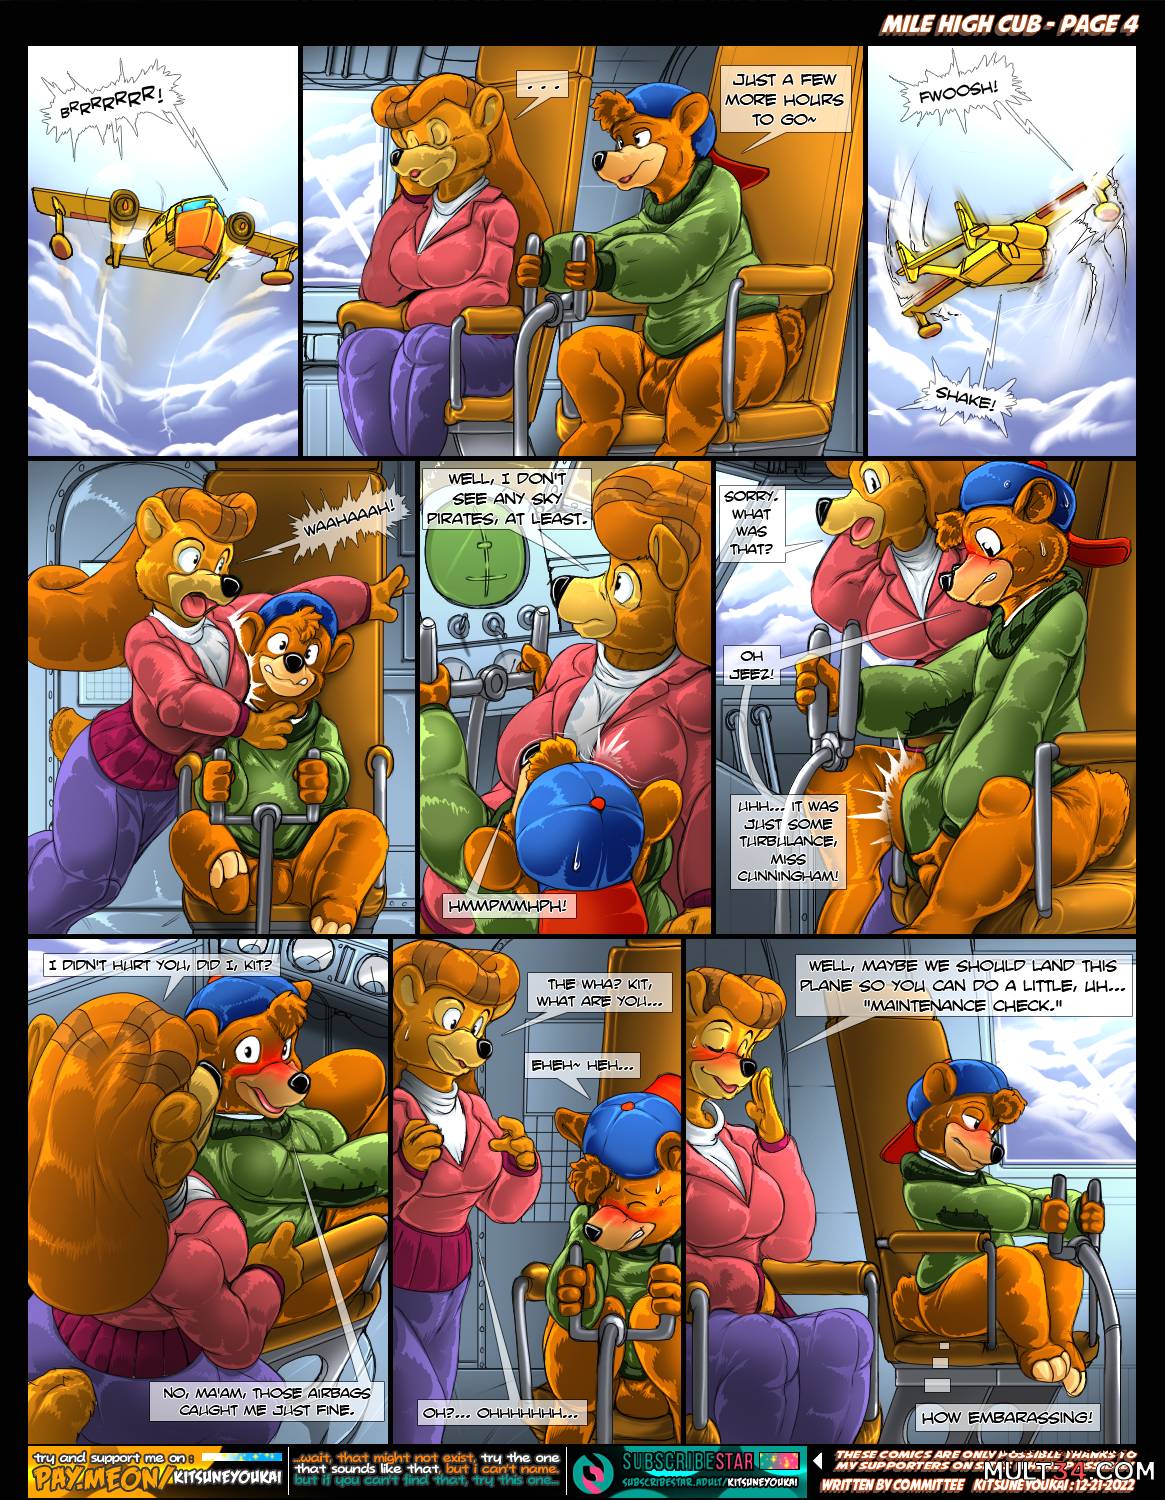 Mile High Club page 4